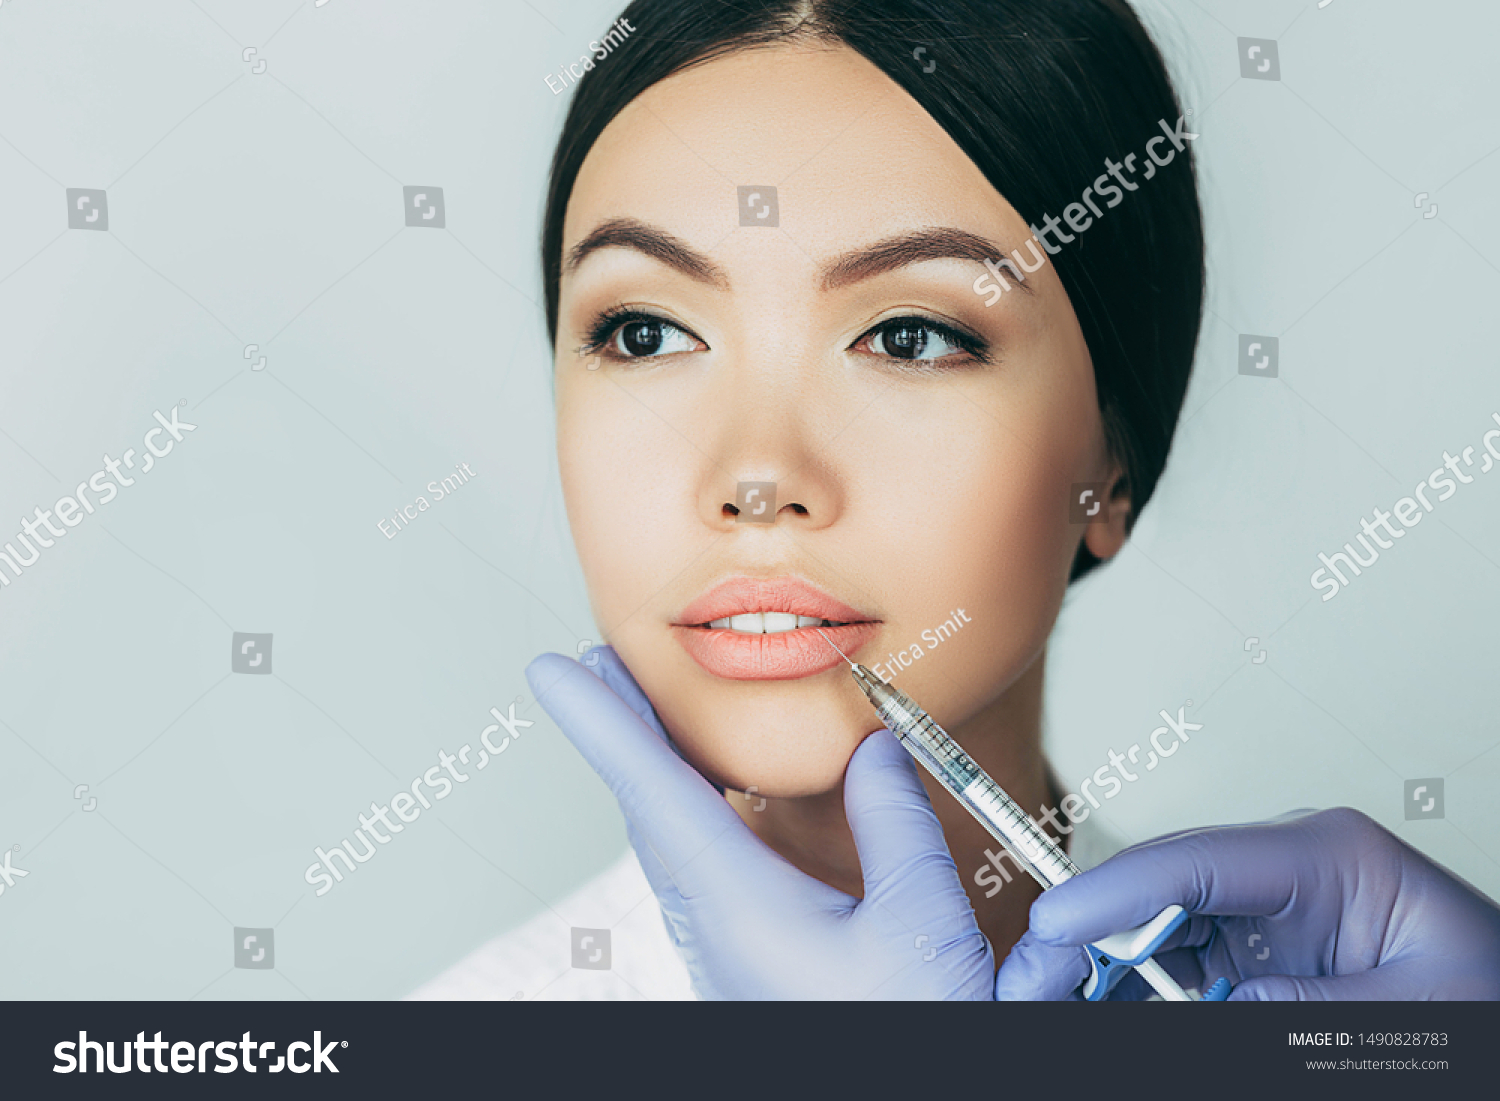 asian woman plumper lips, getting bigger lips. prick of a syringe for the lips. injections for bigger volume #1490828783